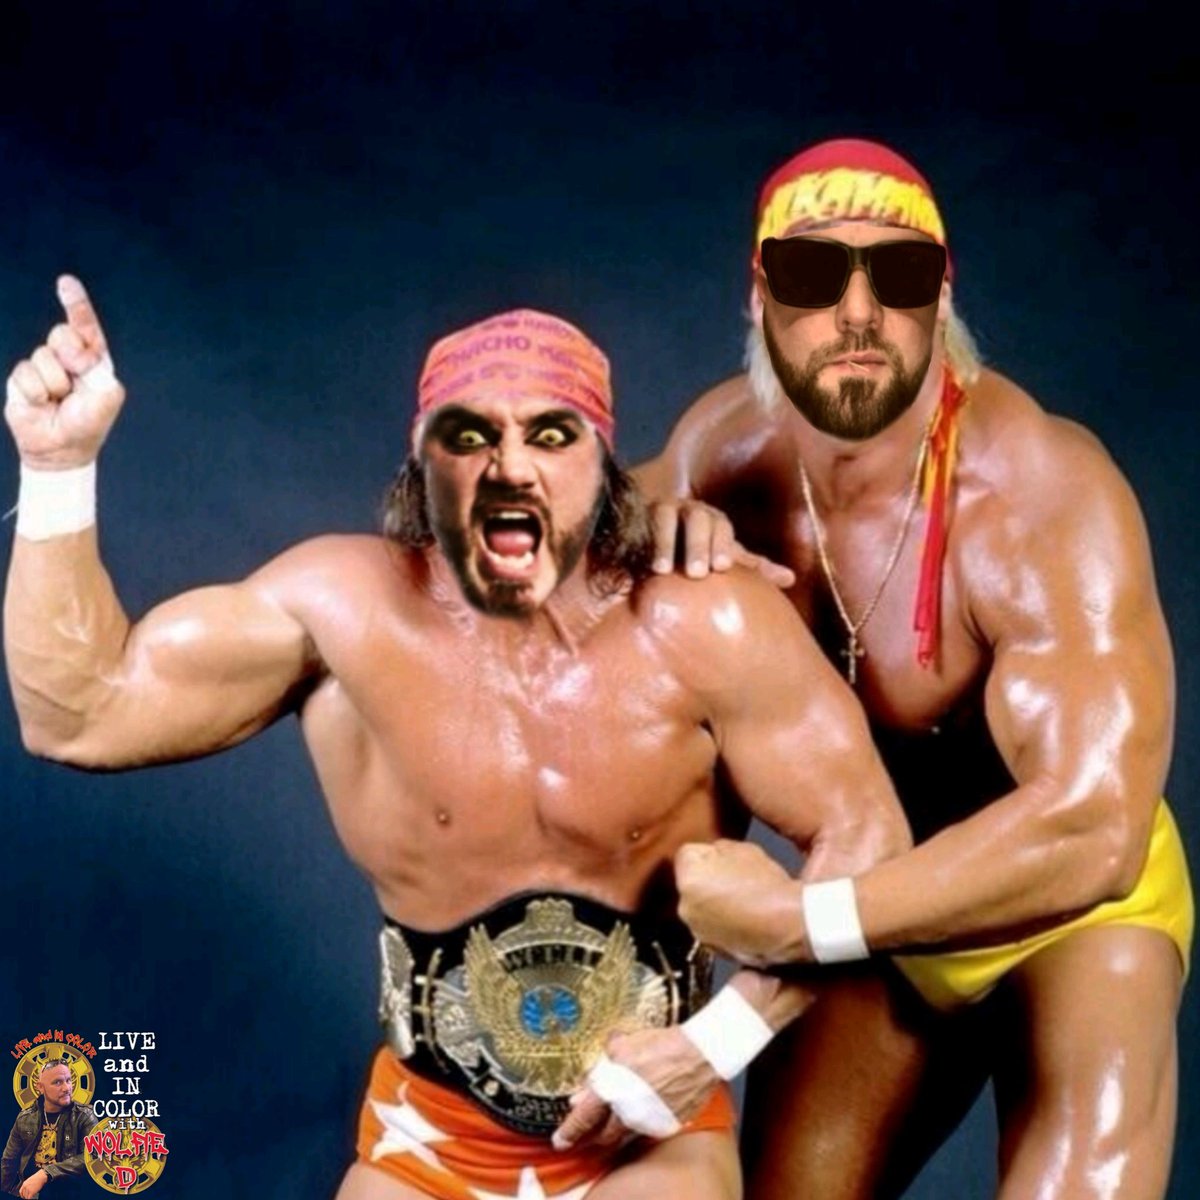 The Mega Powers of the podcast world!